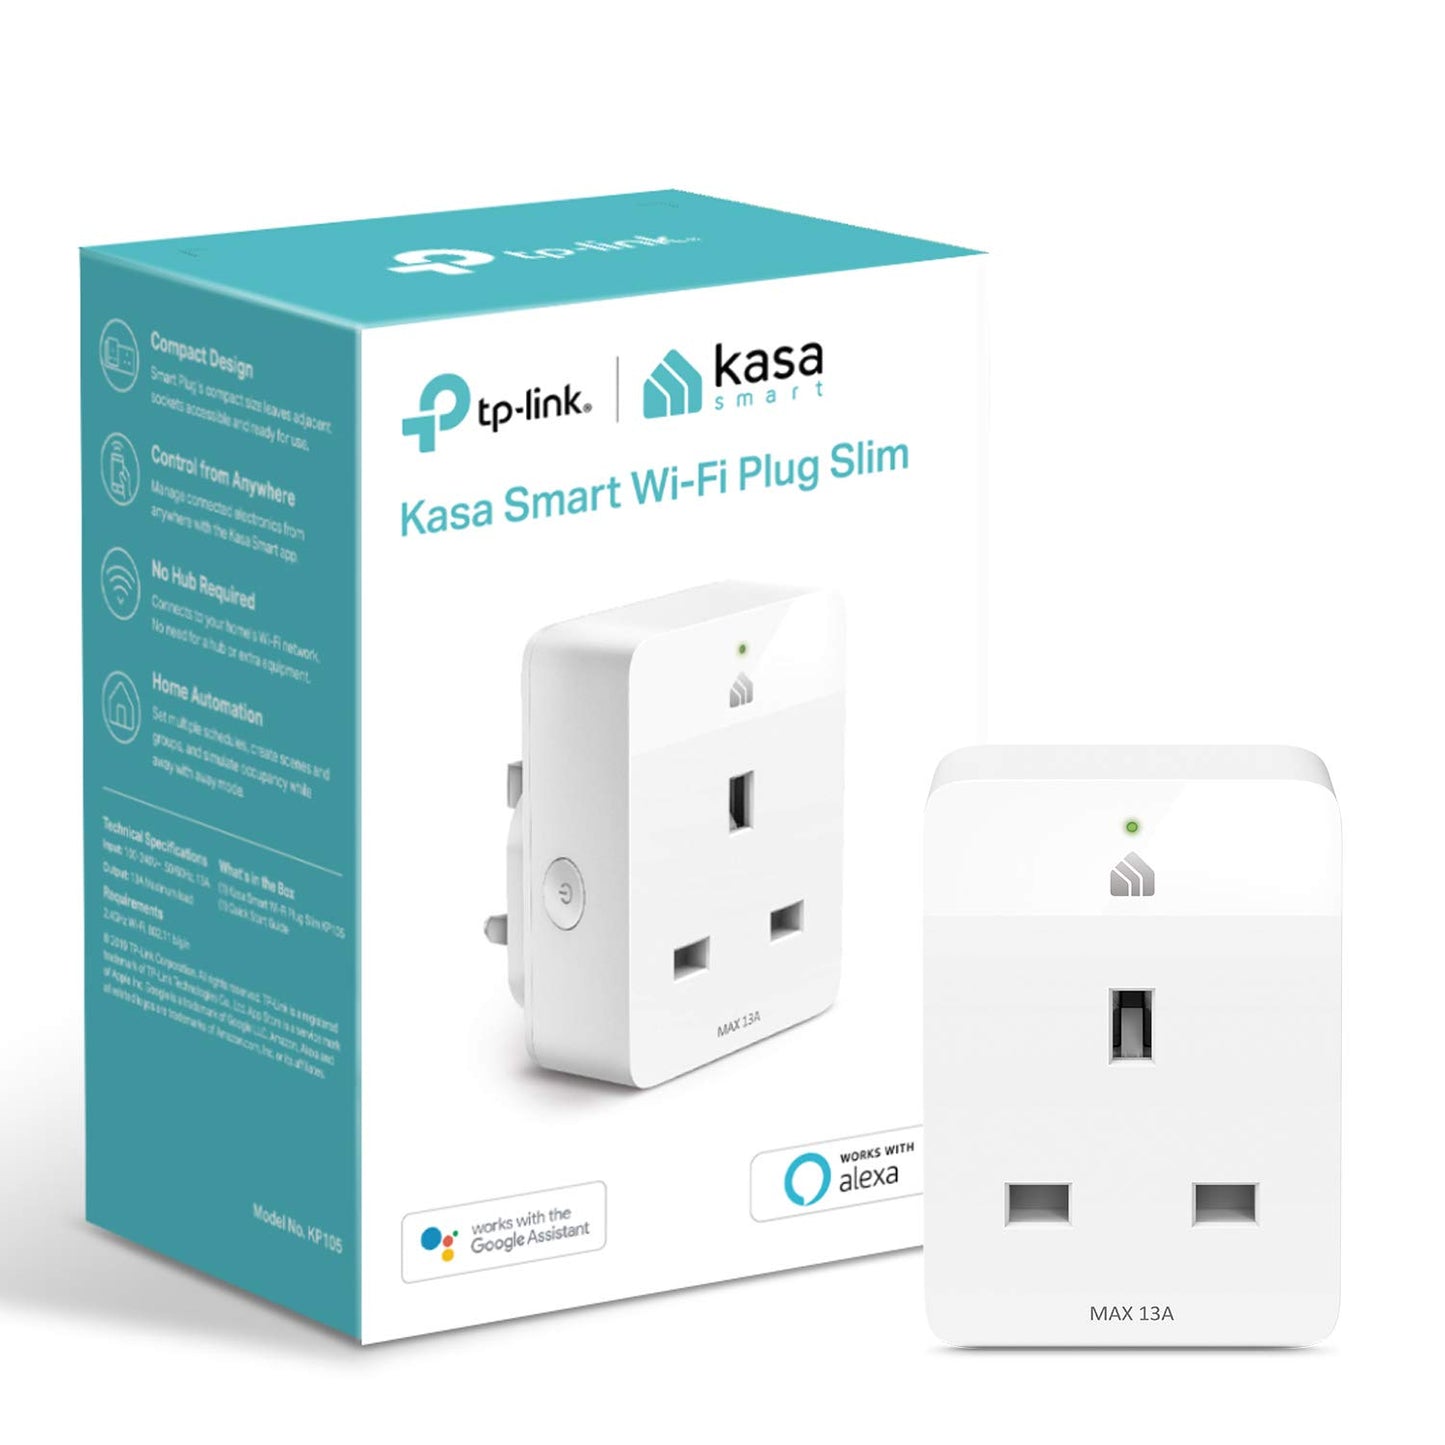 TP-Link Kasa Mini Smart Plug, Max 13A,Wi-Fi Outlet, Works with Amazon Alexa, Google Home and Samsung SmartThings, Wireless Smart Socket (KP105), A Certified for Humans Device